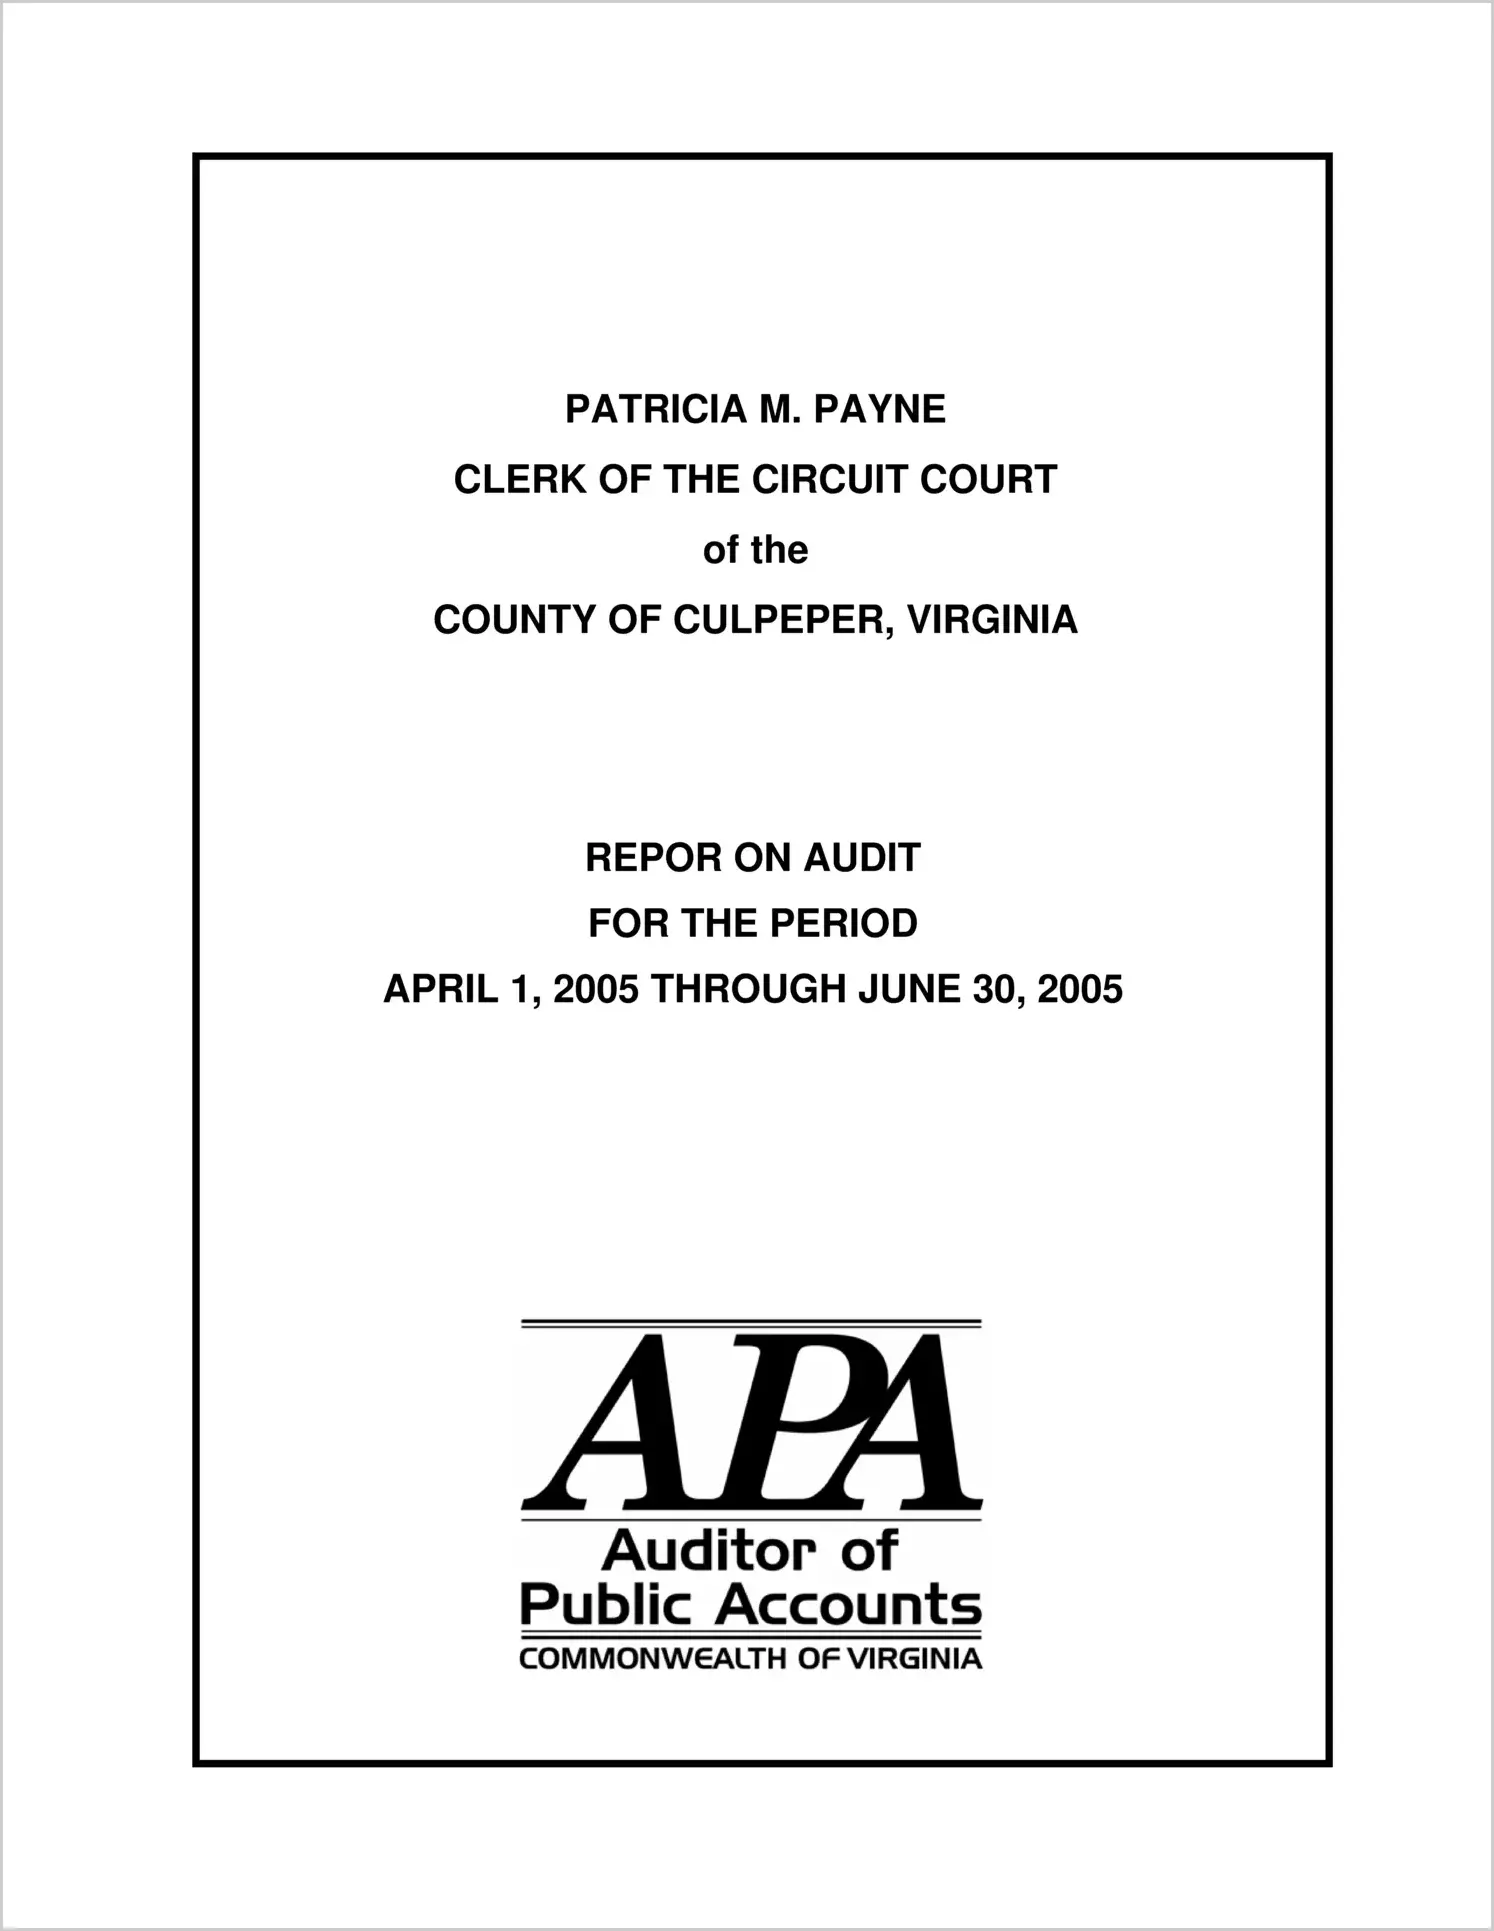 Clerk of the Circuit Court of the County of Culpeper for the period April 1, 2005 through June 30, 2005